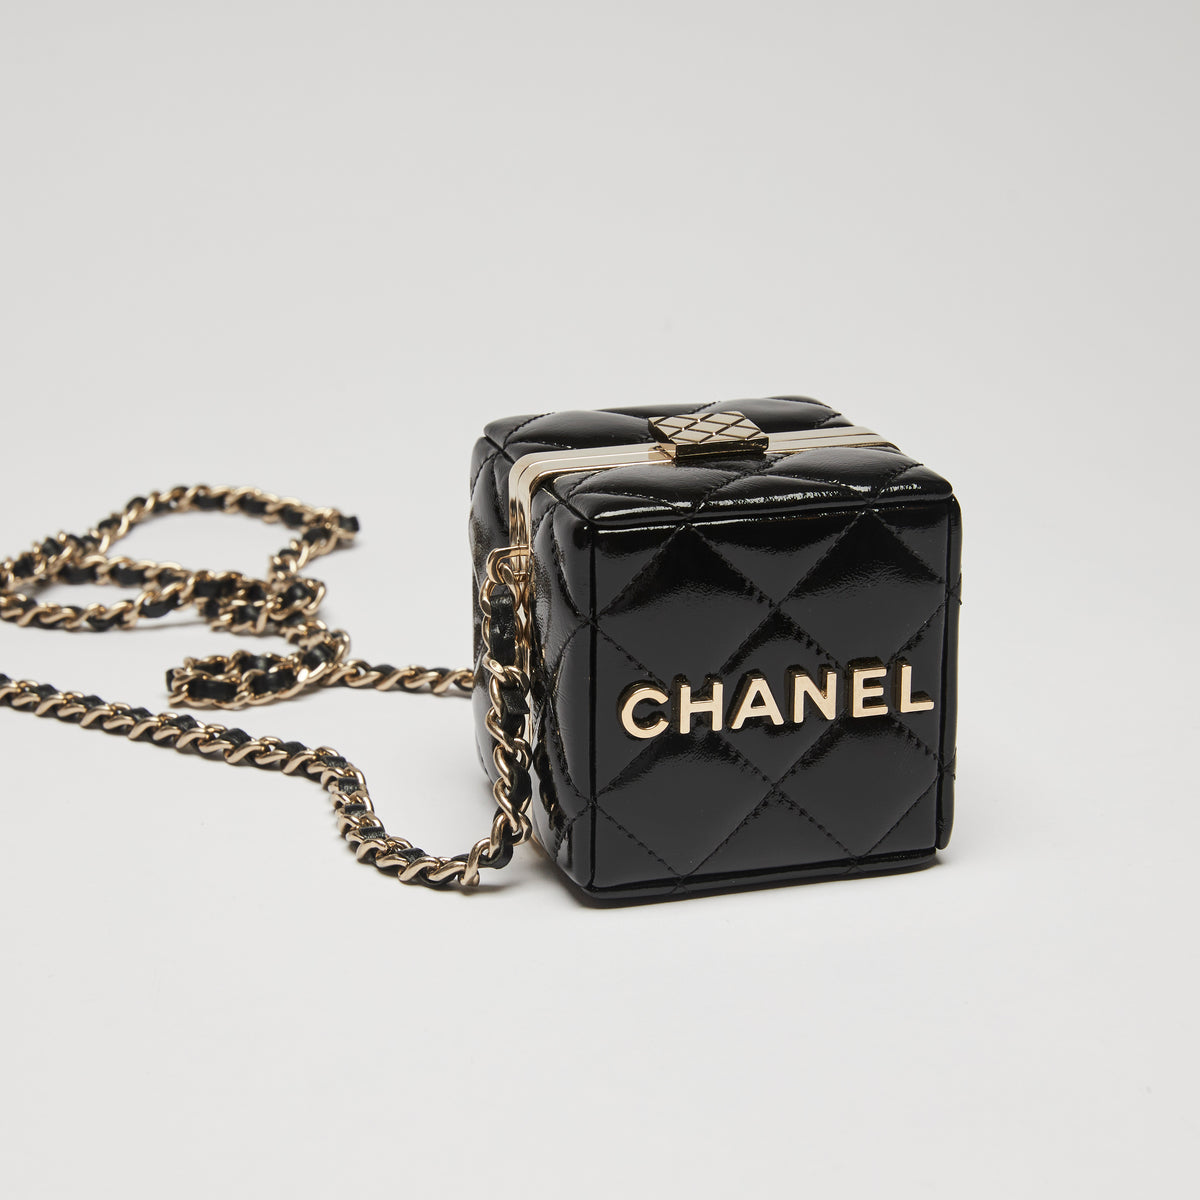 Chanel Black Patent Leather Mini Box Clutch with Chain